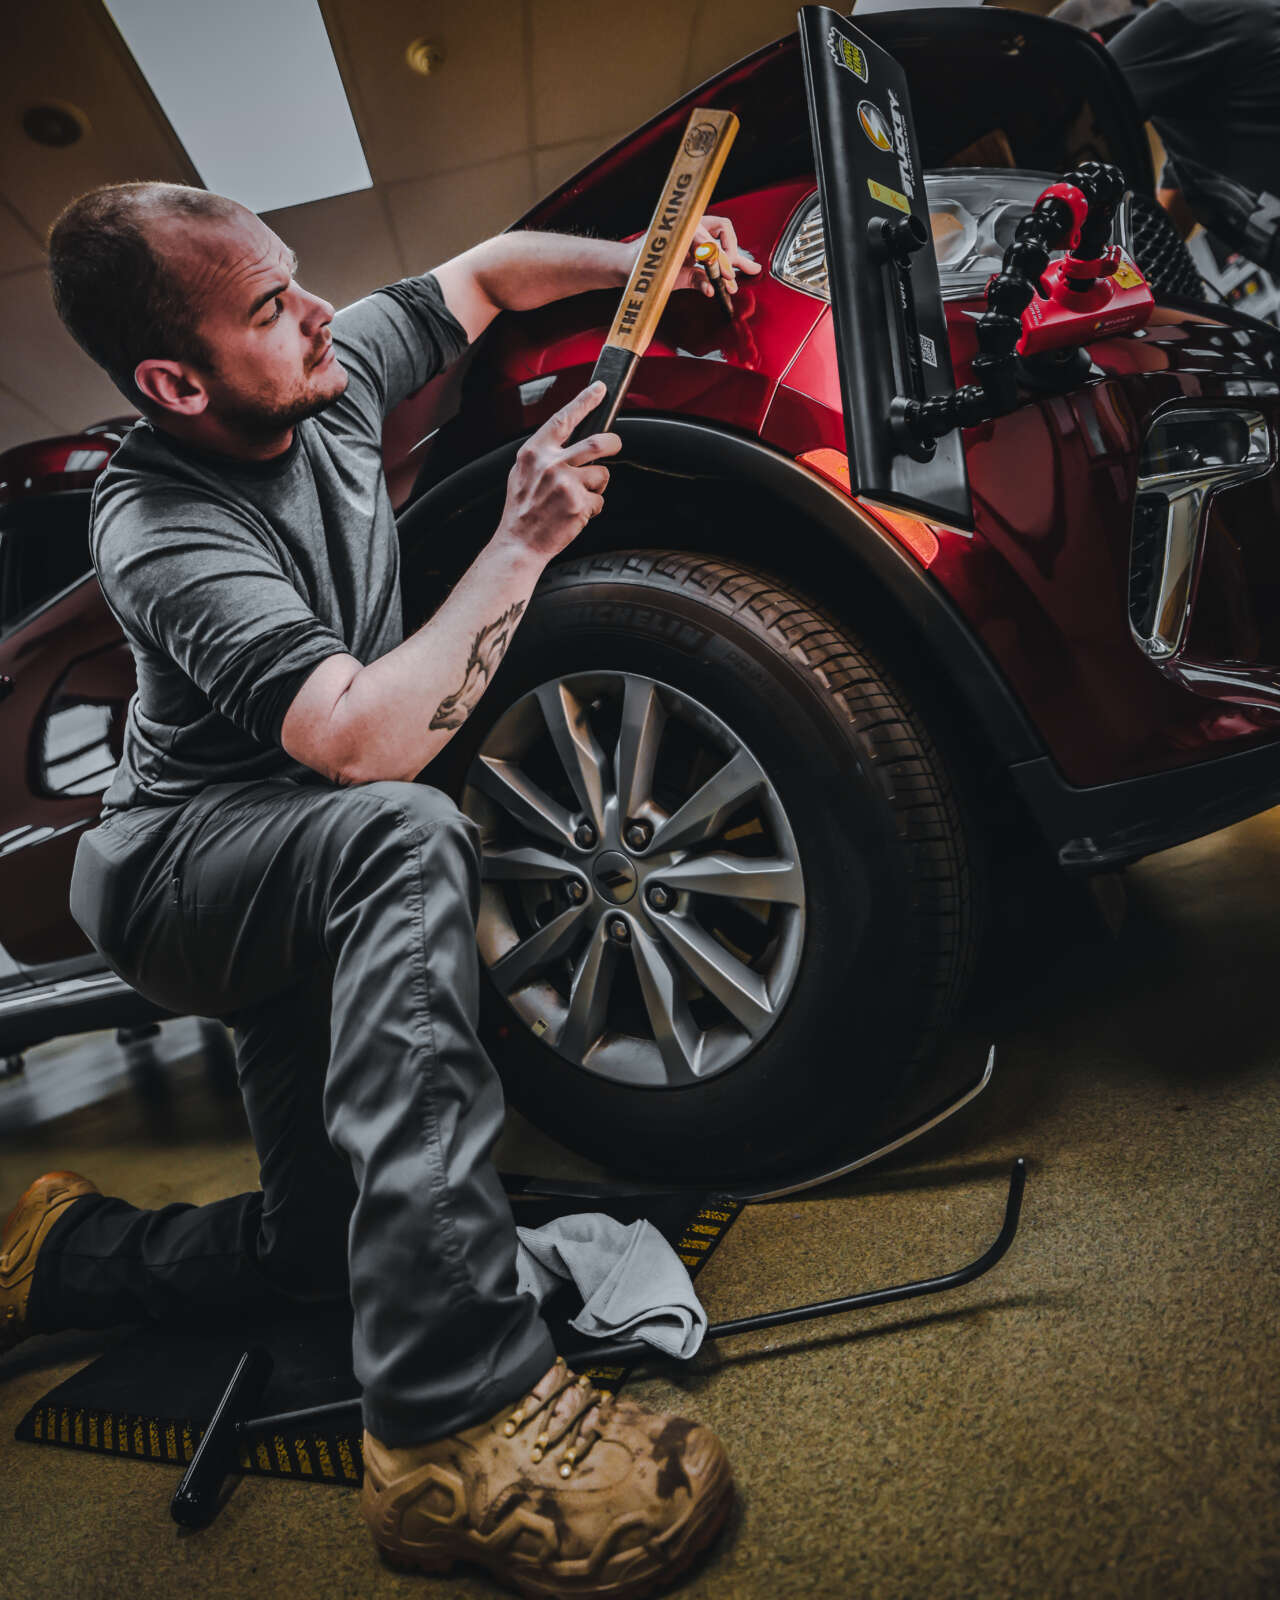 A technician receiving advanced PDR training while working on a car in a garage.